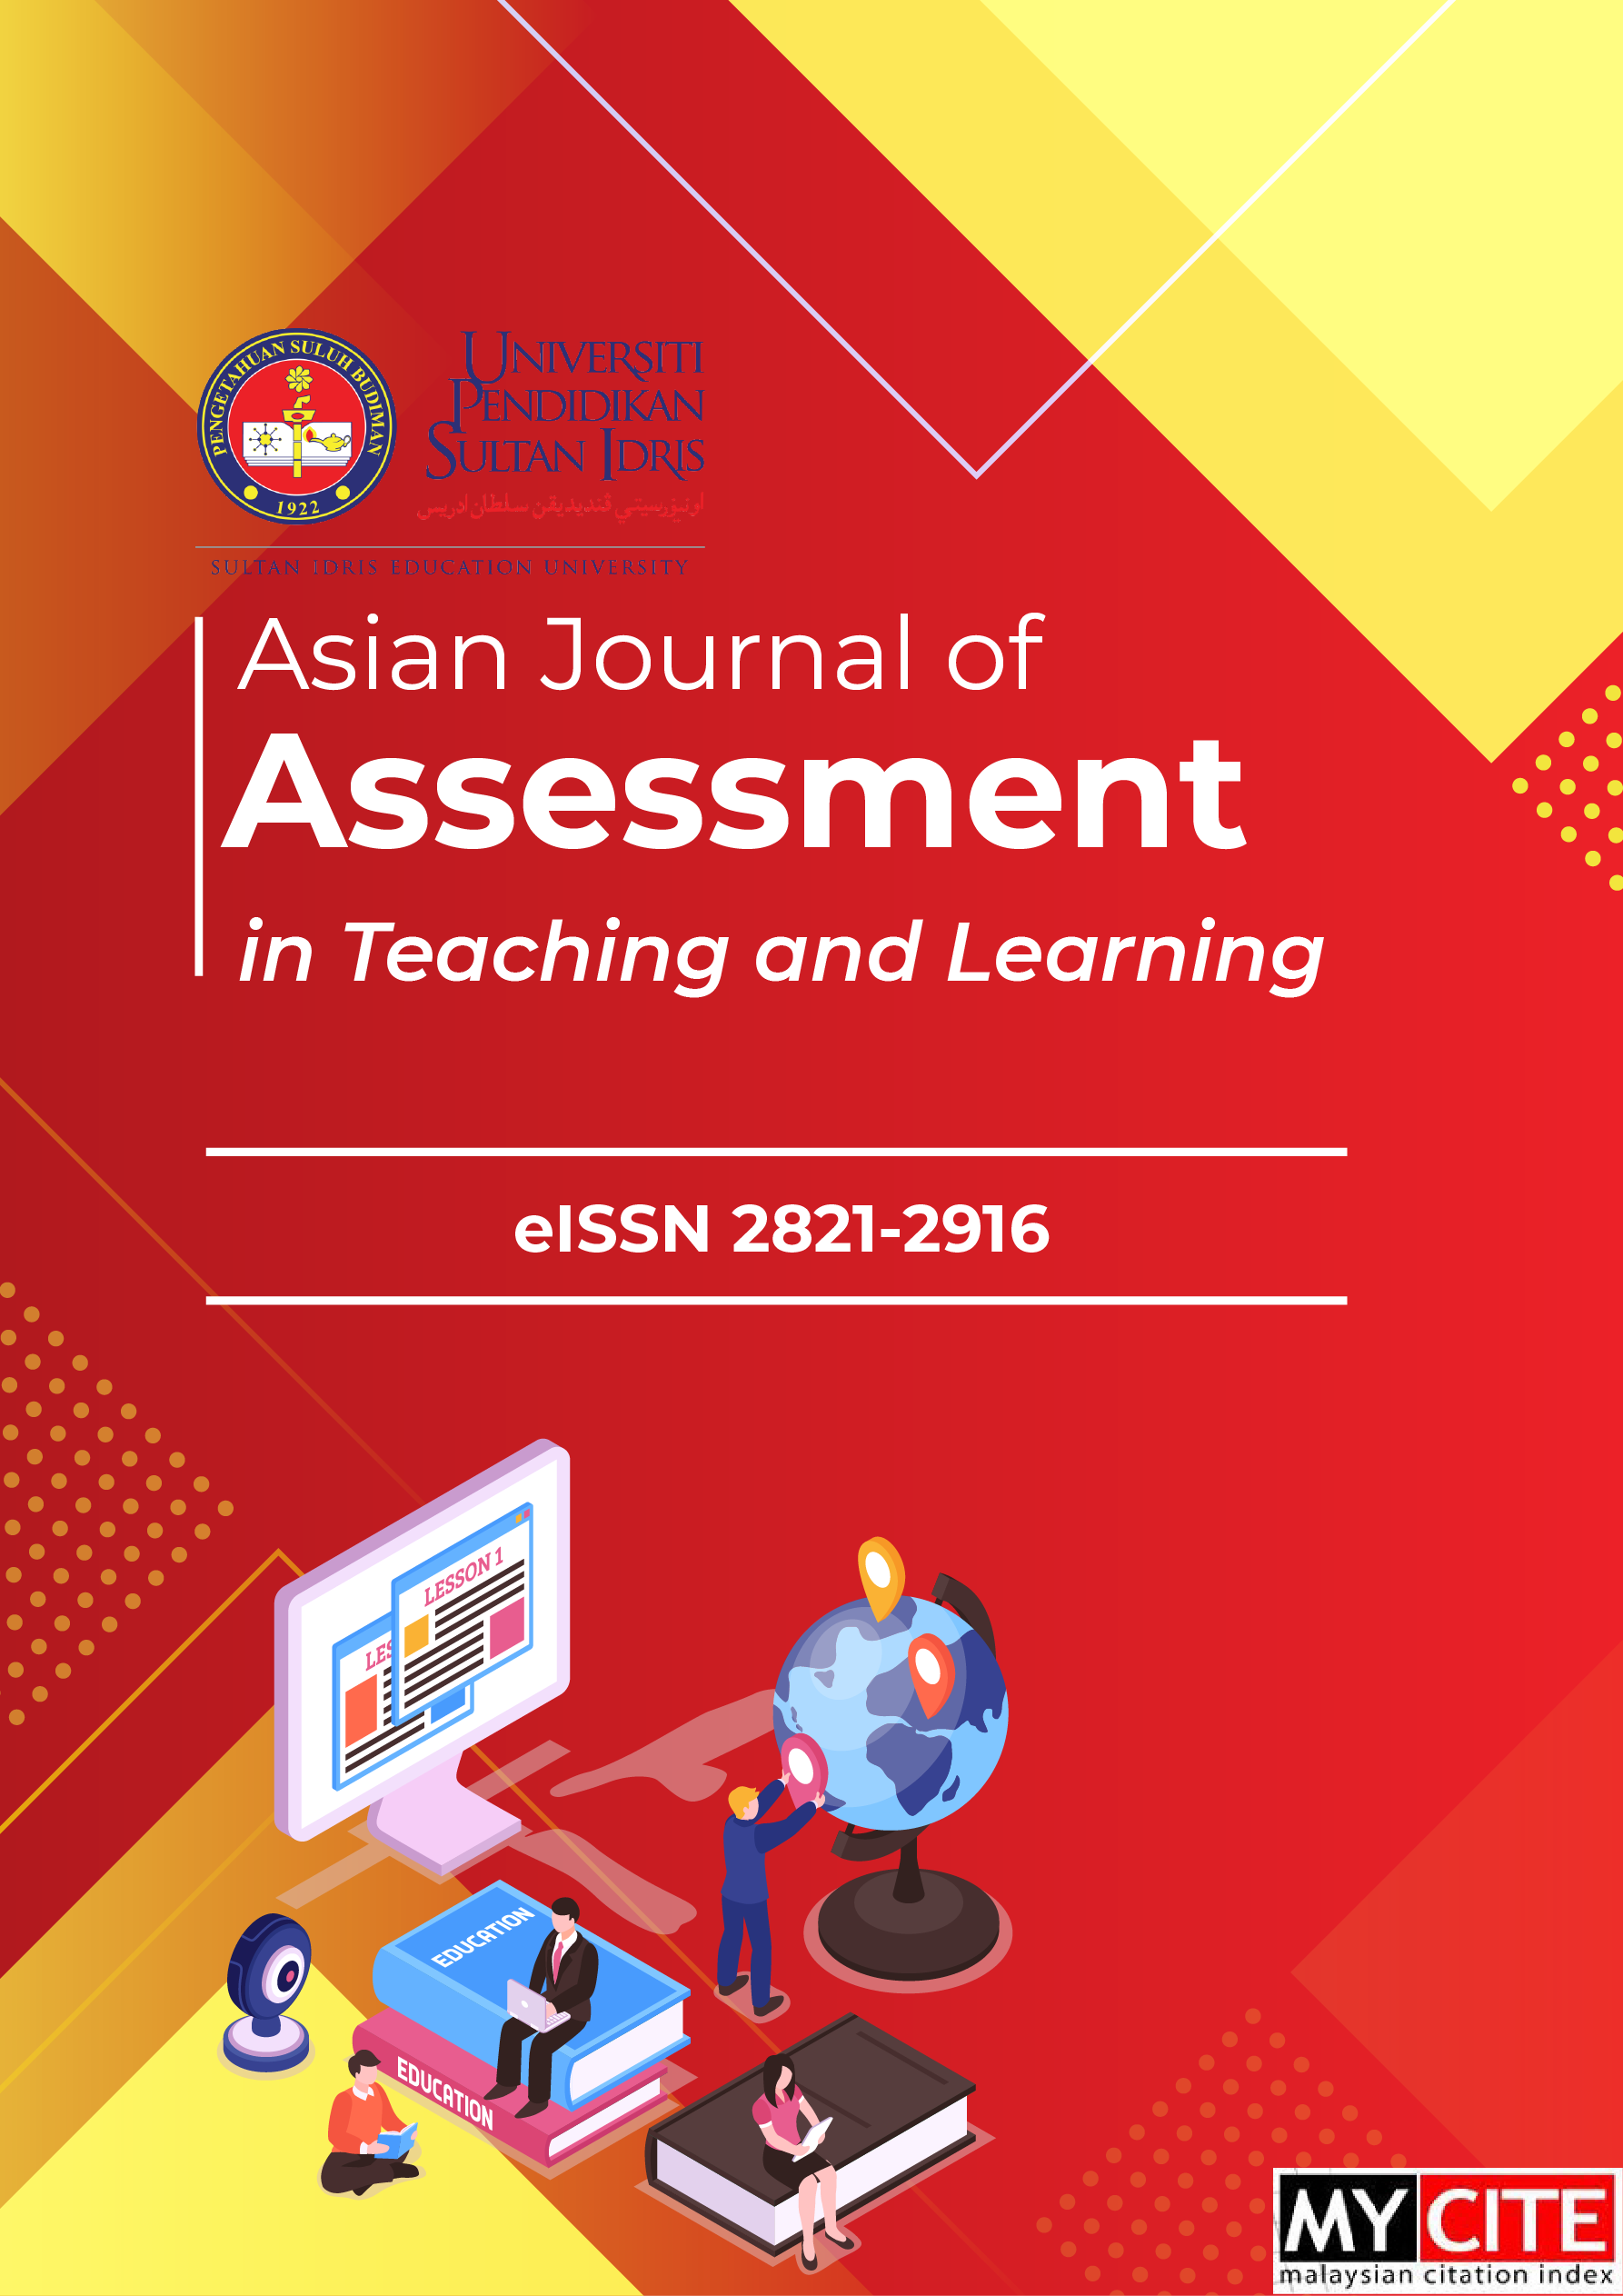 					View Vol. 9 No. 2 (2019): Asian Journal of Assessment in Teaching and Learning
				